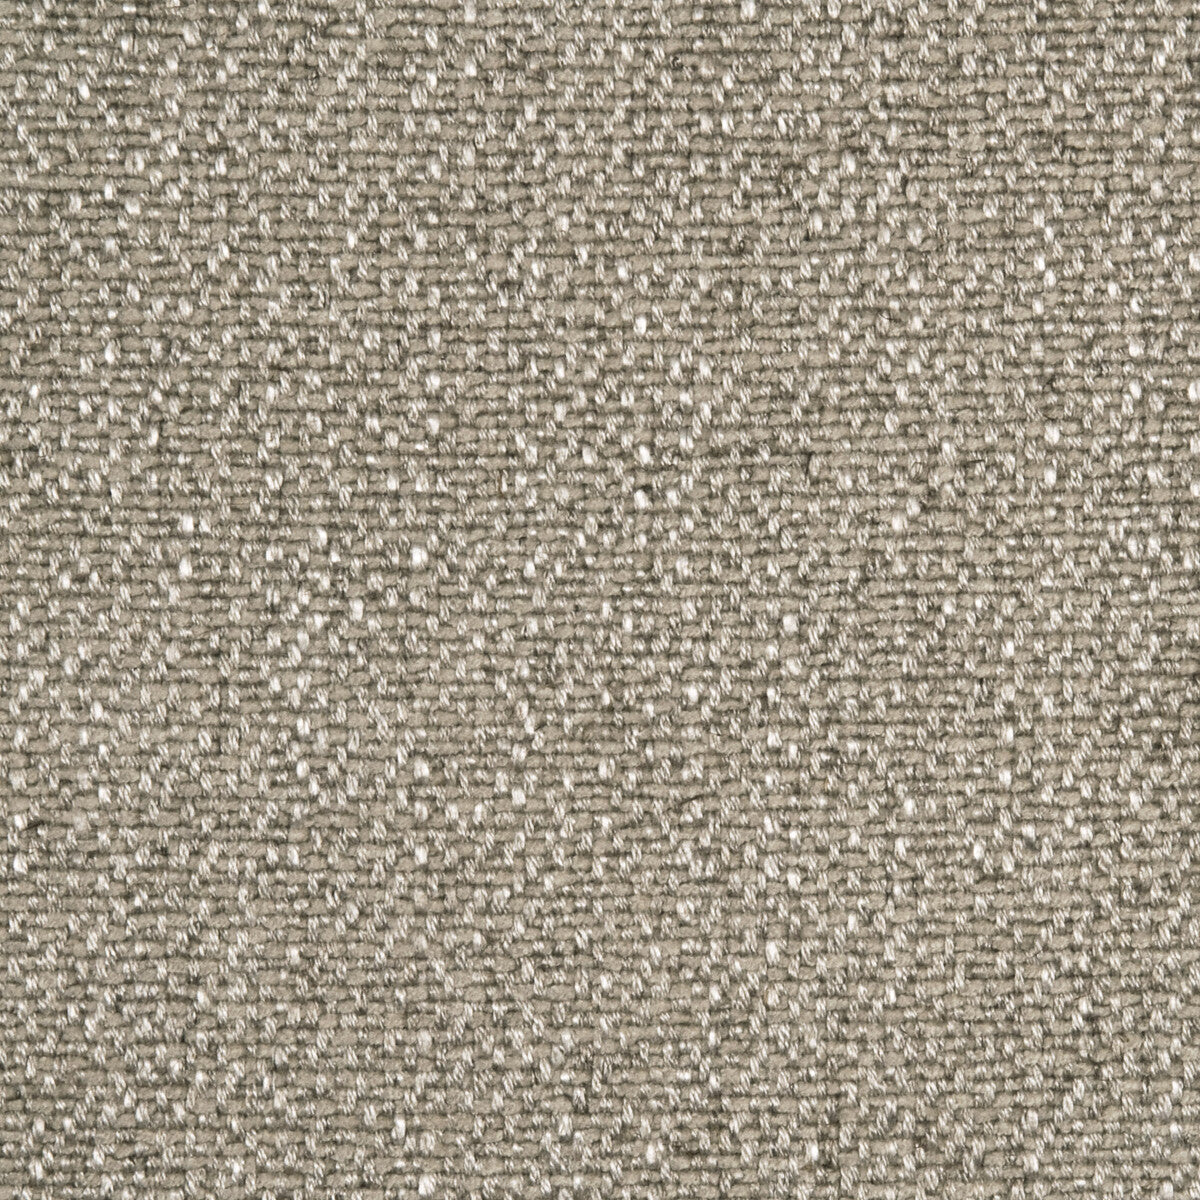 Minimalism fabric in oatmeal color - pattern 34470.230.0 - by Kravet Couture in the Threads Colour Library collection